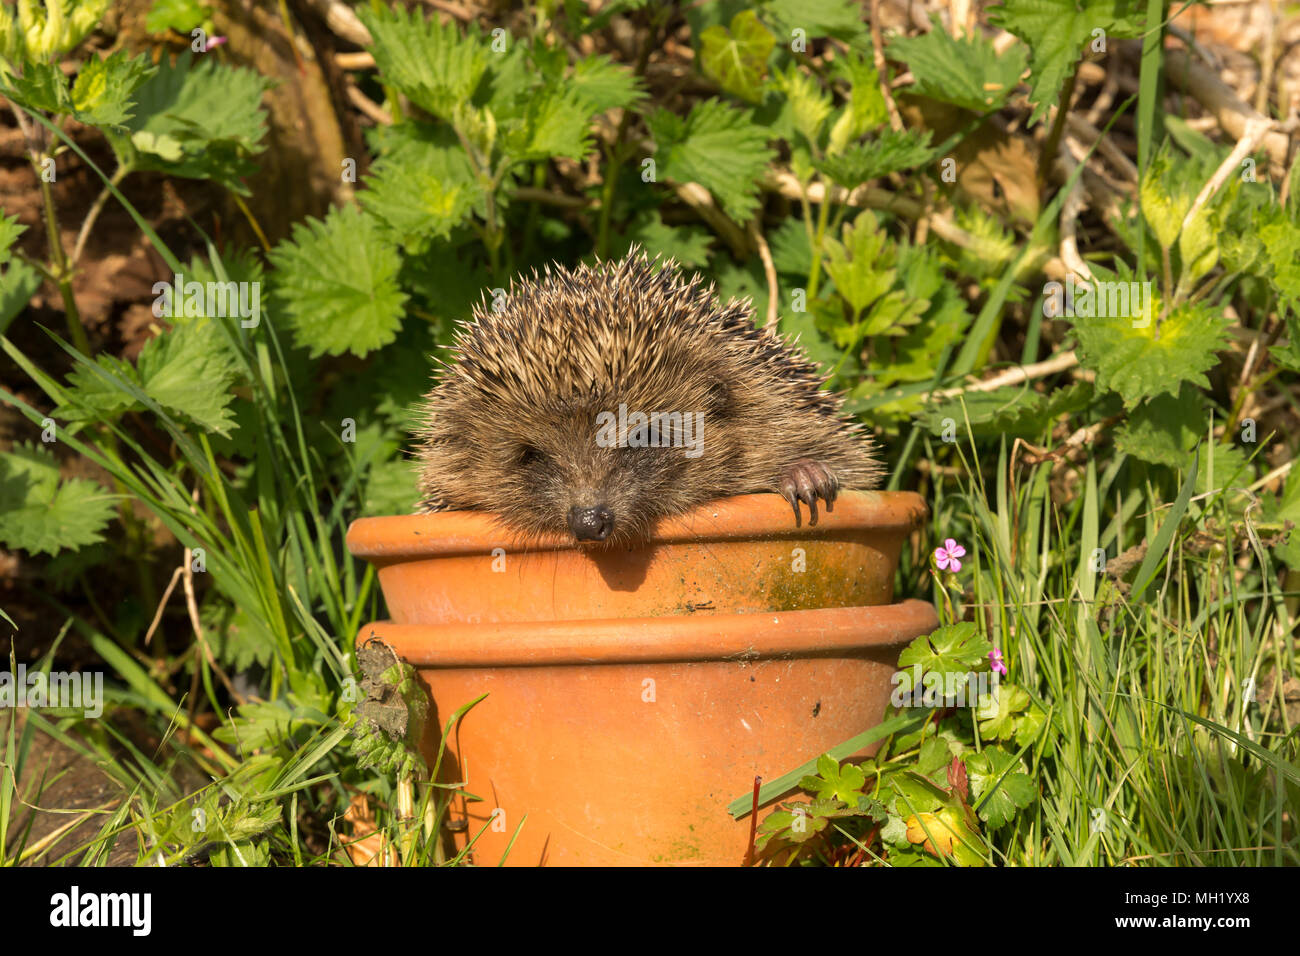 Hedgehog, Erinaceous Europaeus, wild, native, hedgehog, in a terracotta plant pot surrounded by green garden foliage.  Landscape. Stock Photo